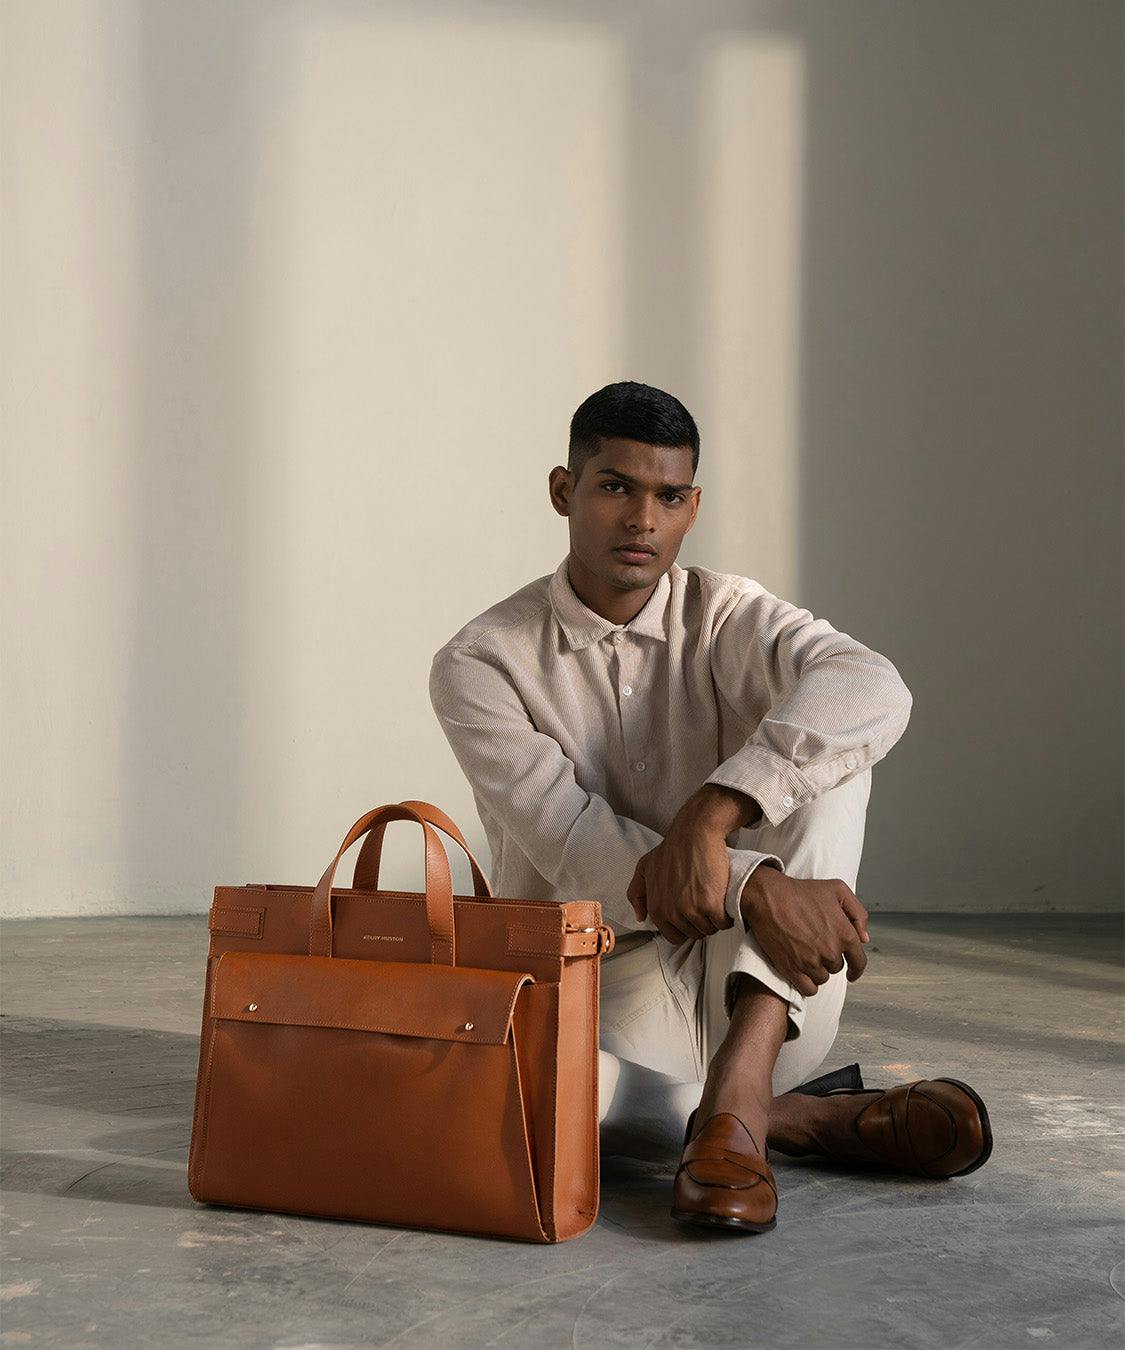 EDEN LAPTOP BAG - Tan, a product by Kelby Huston